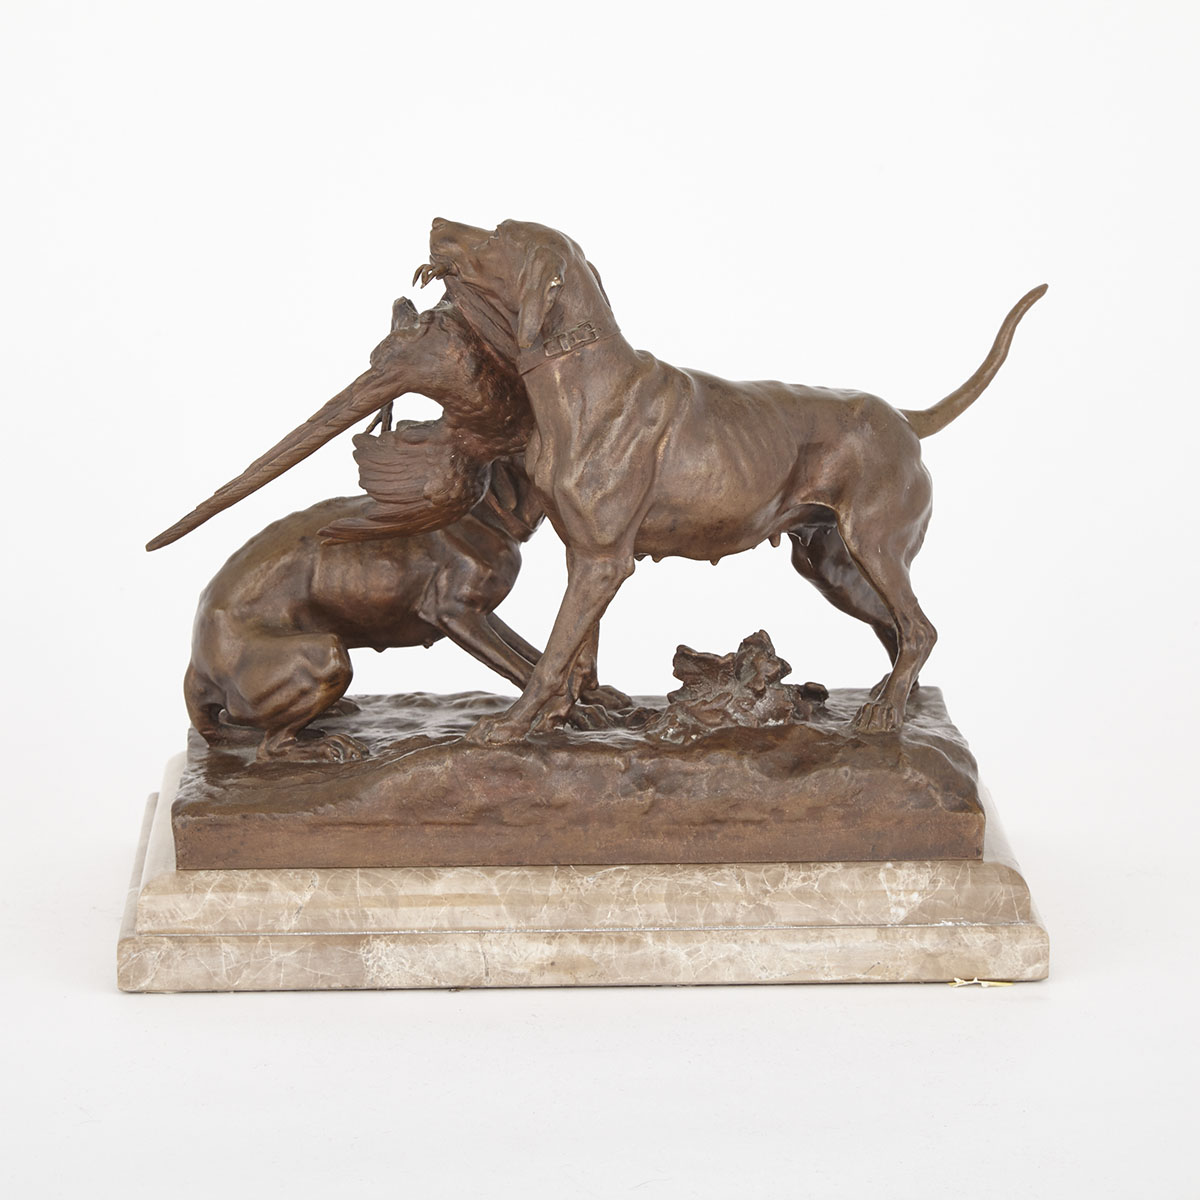 A French Bronze Hunting Group of Two Hounds and a Pheasant by Louis François Georges Comte de Ferrieres (1837-1907), early 20th century